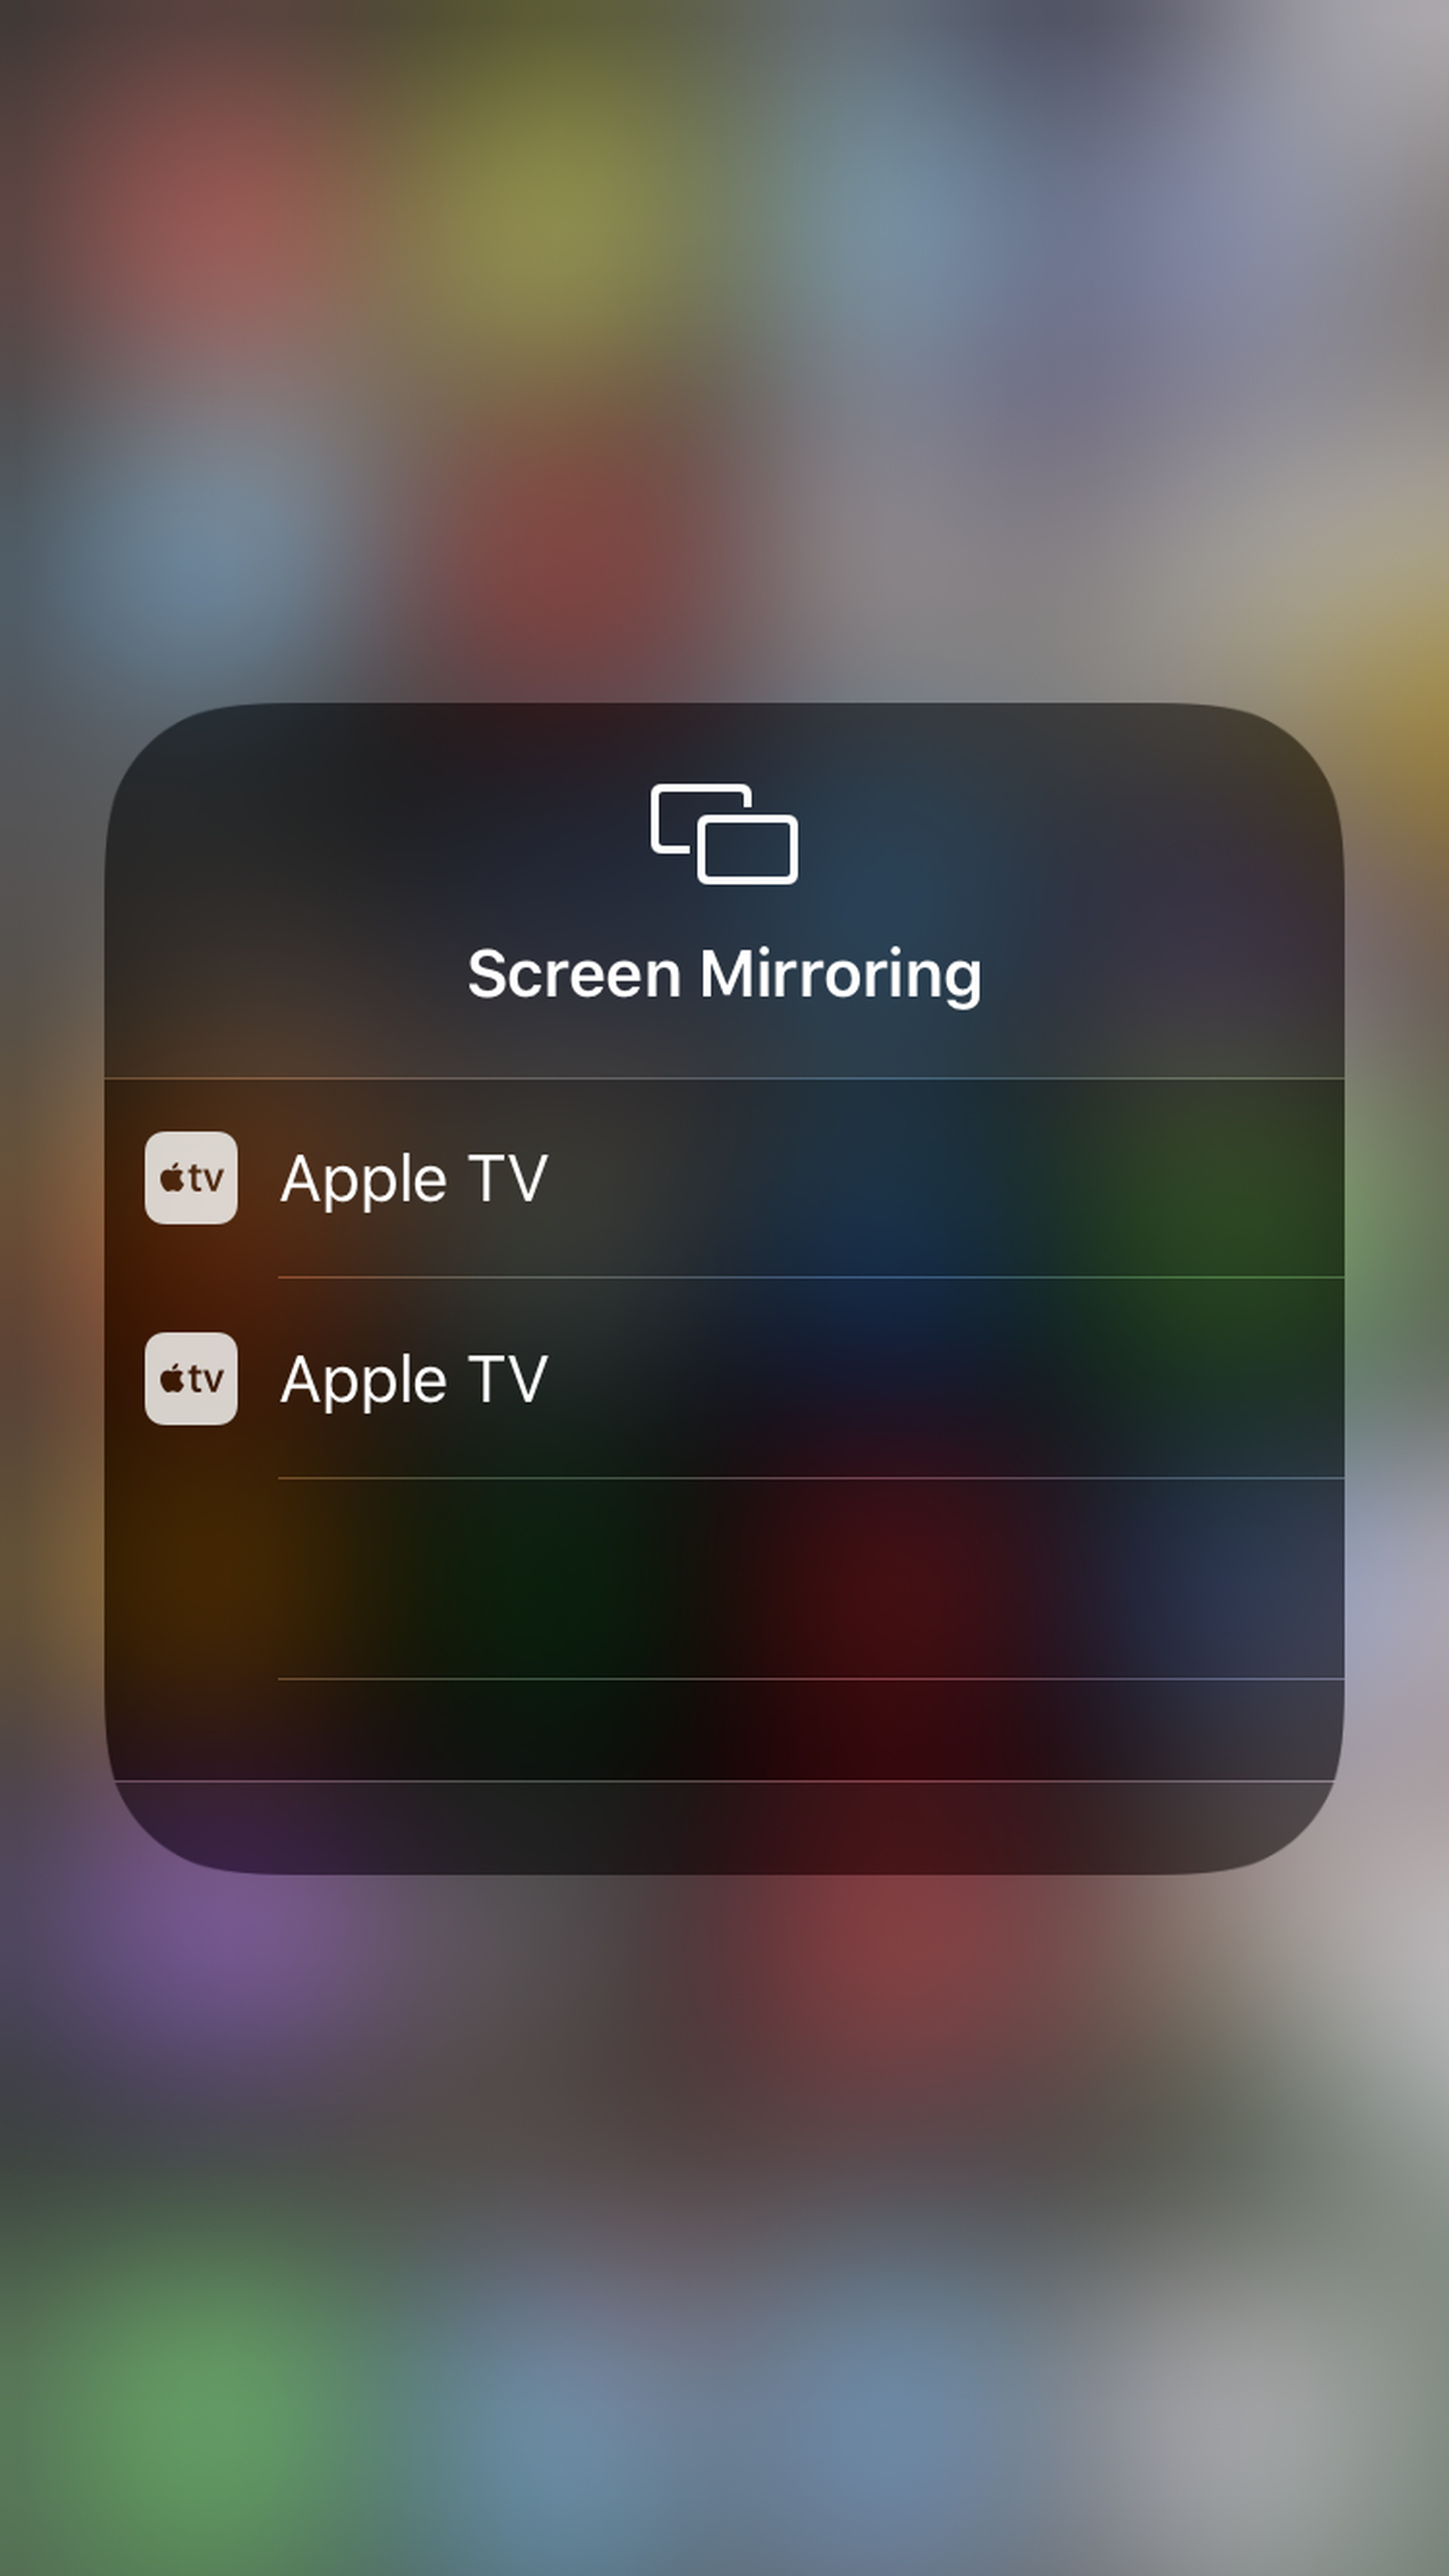 Select a device to start mirroring your screen.